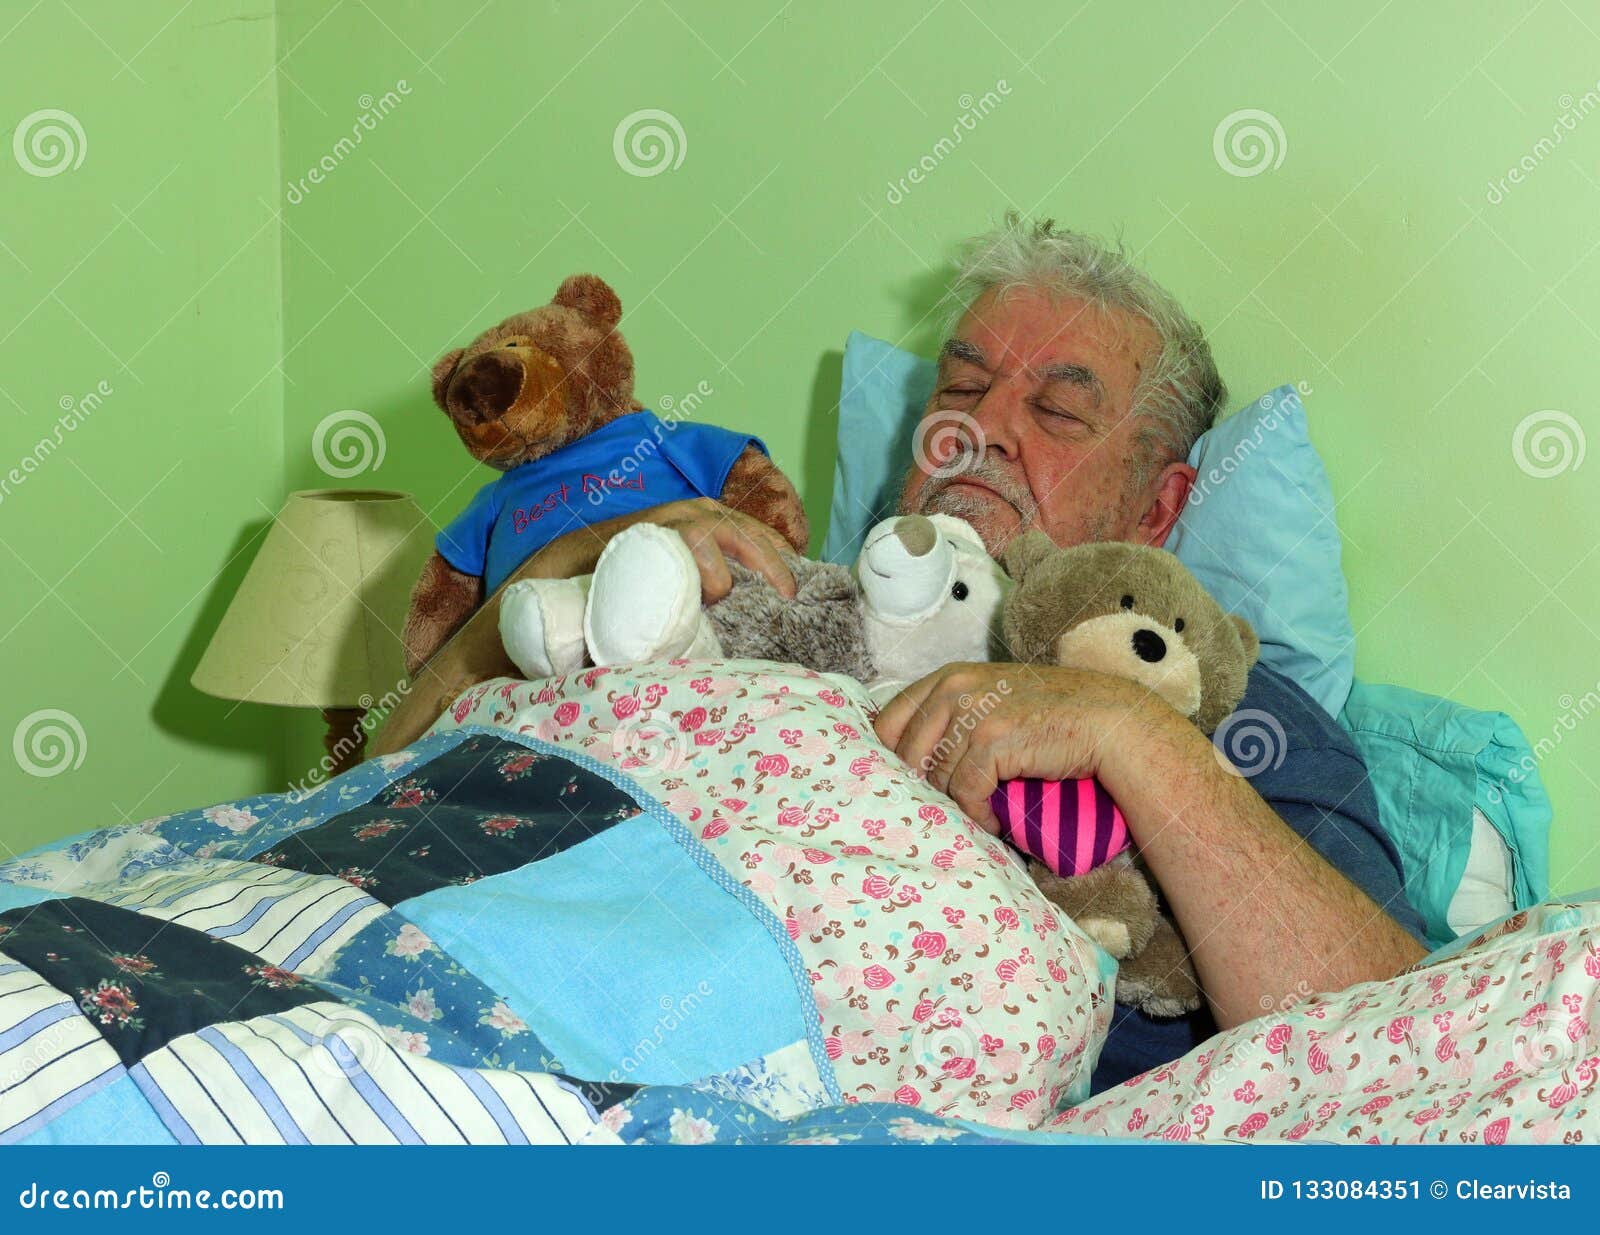 senior man asleep in bed with soft cuddly toys.